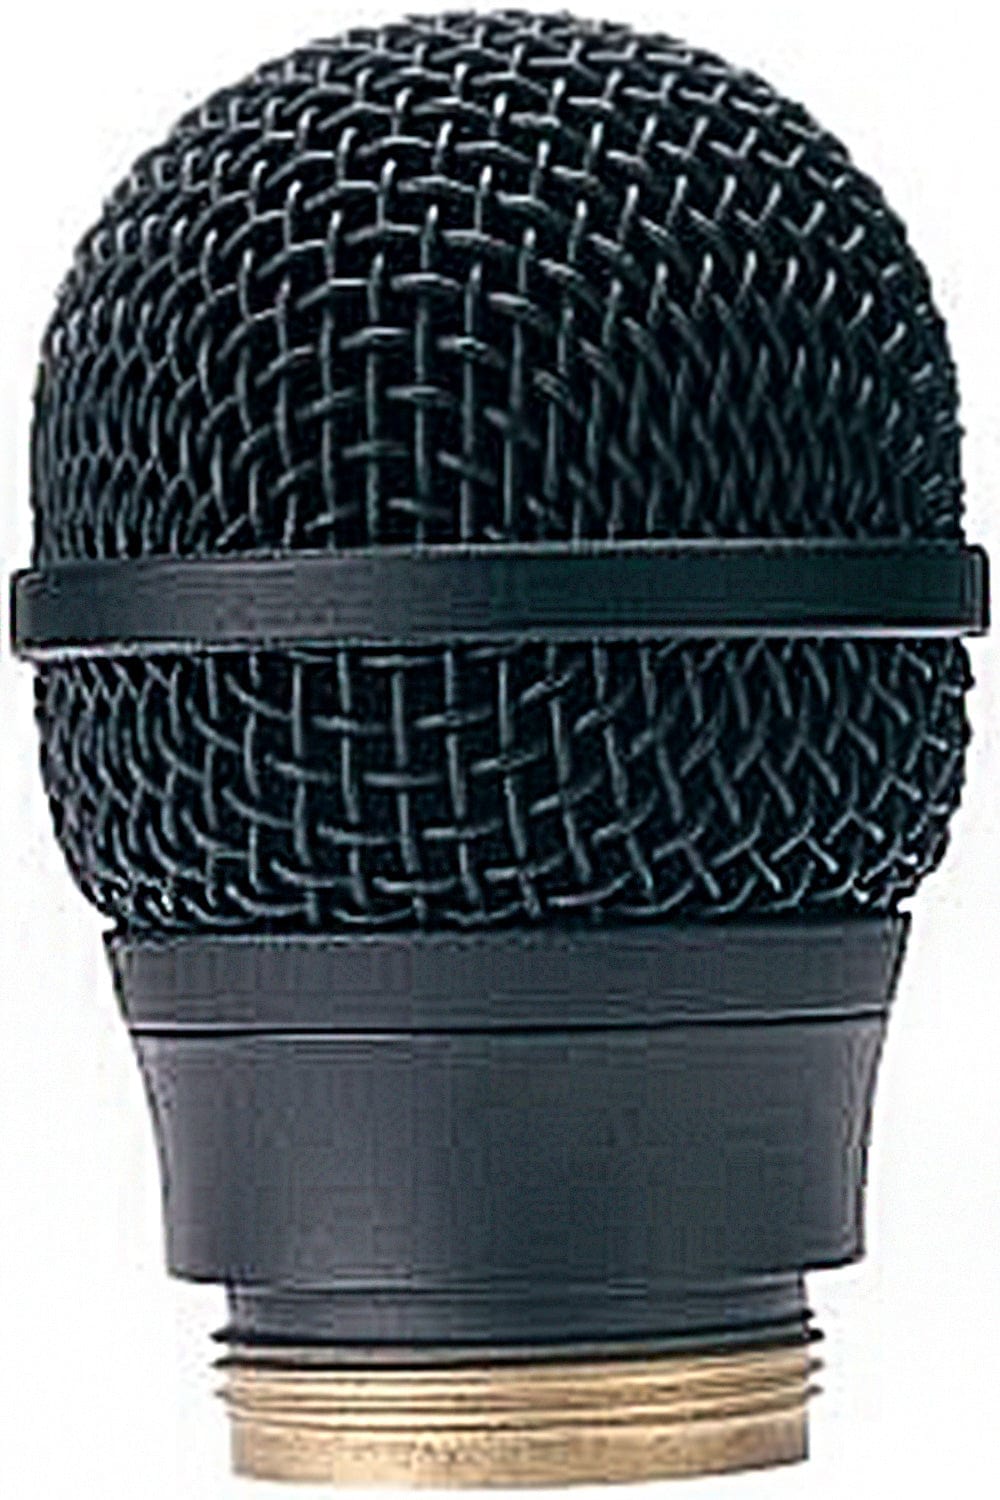 AKG D 880 WL1 Black Super Cardioid Capsule For Microphone - PSSL ProSound and Stage Lighting